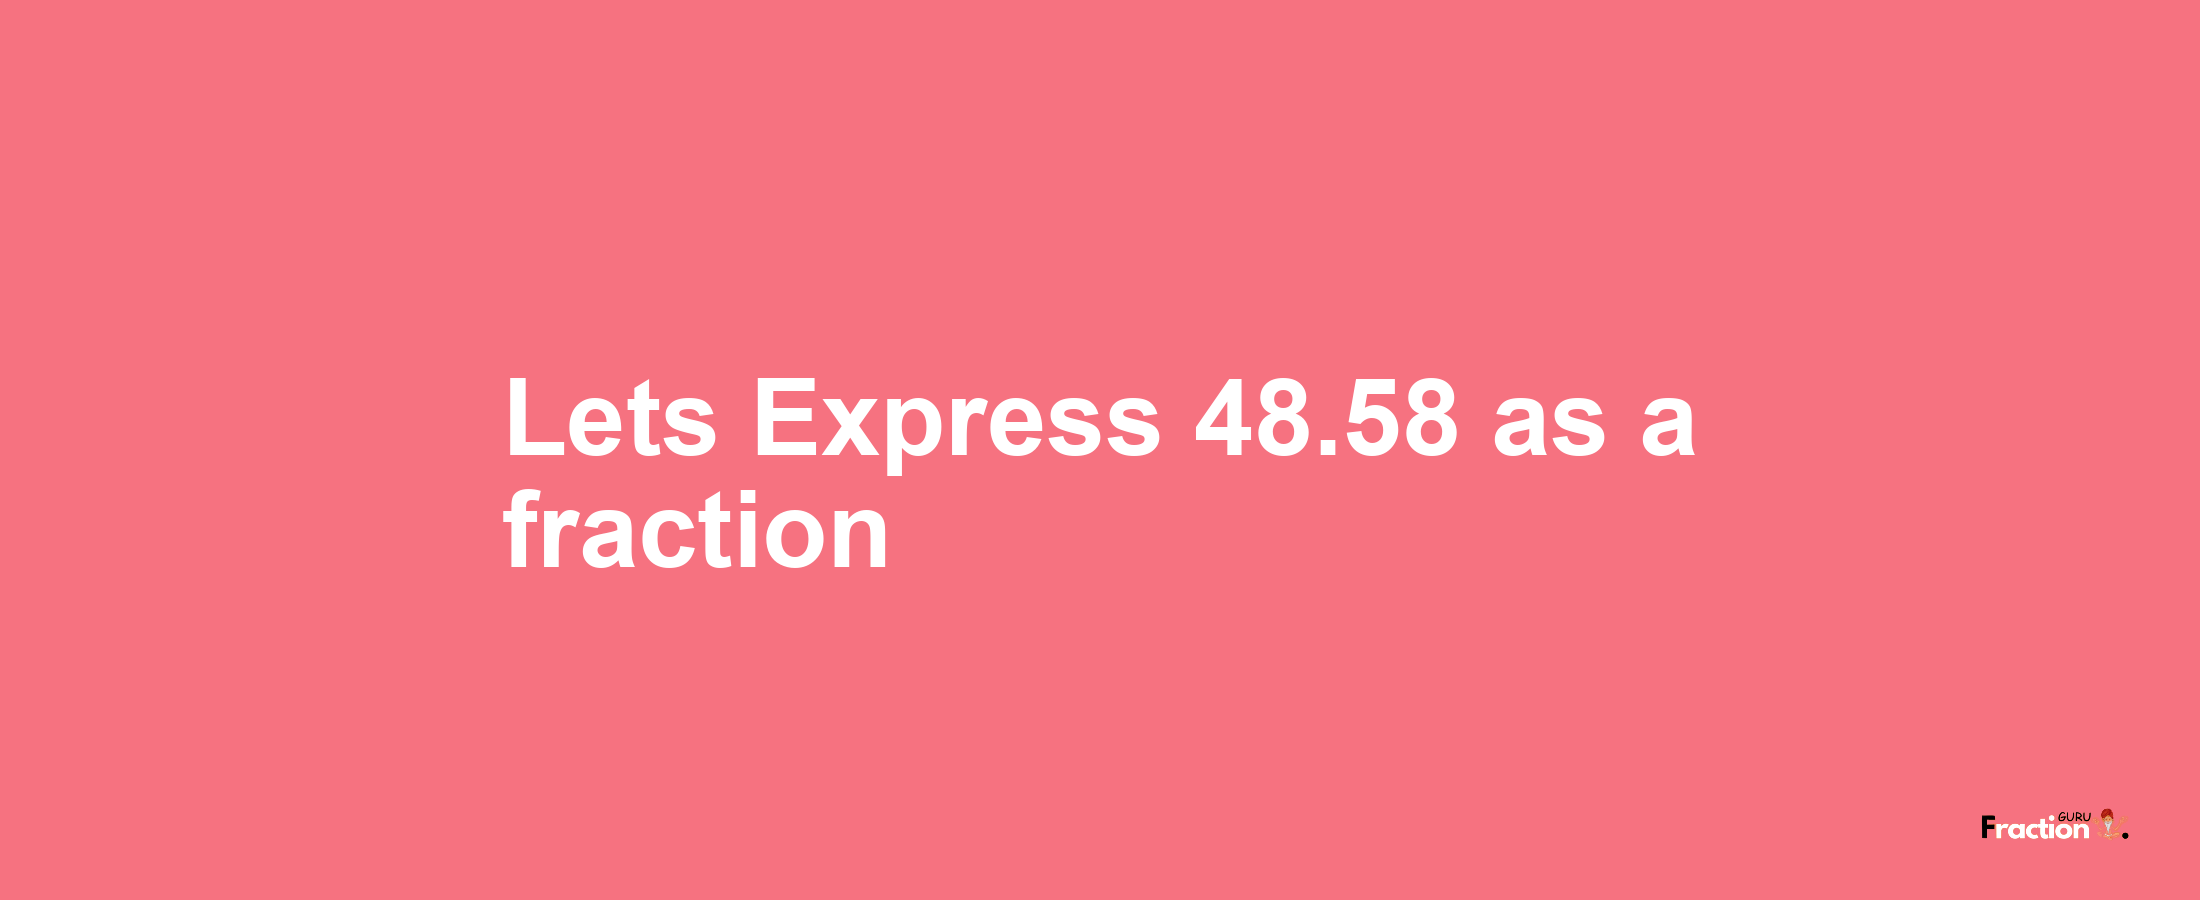 Lets Express 48.58 as afraction